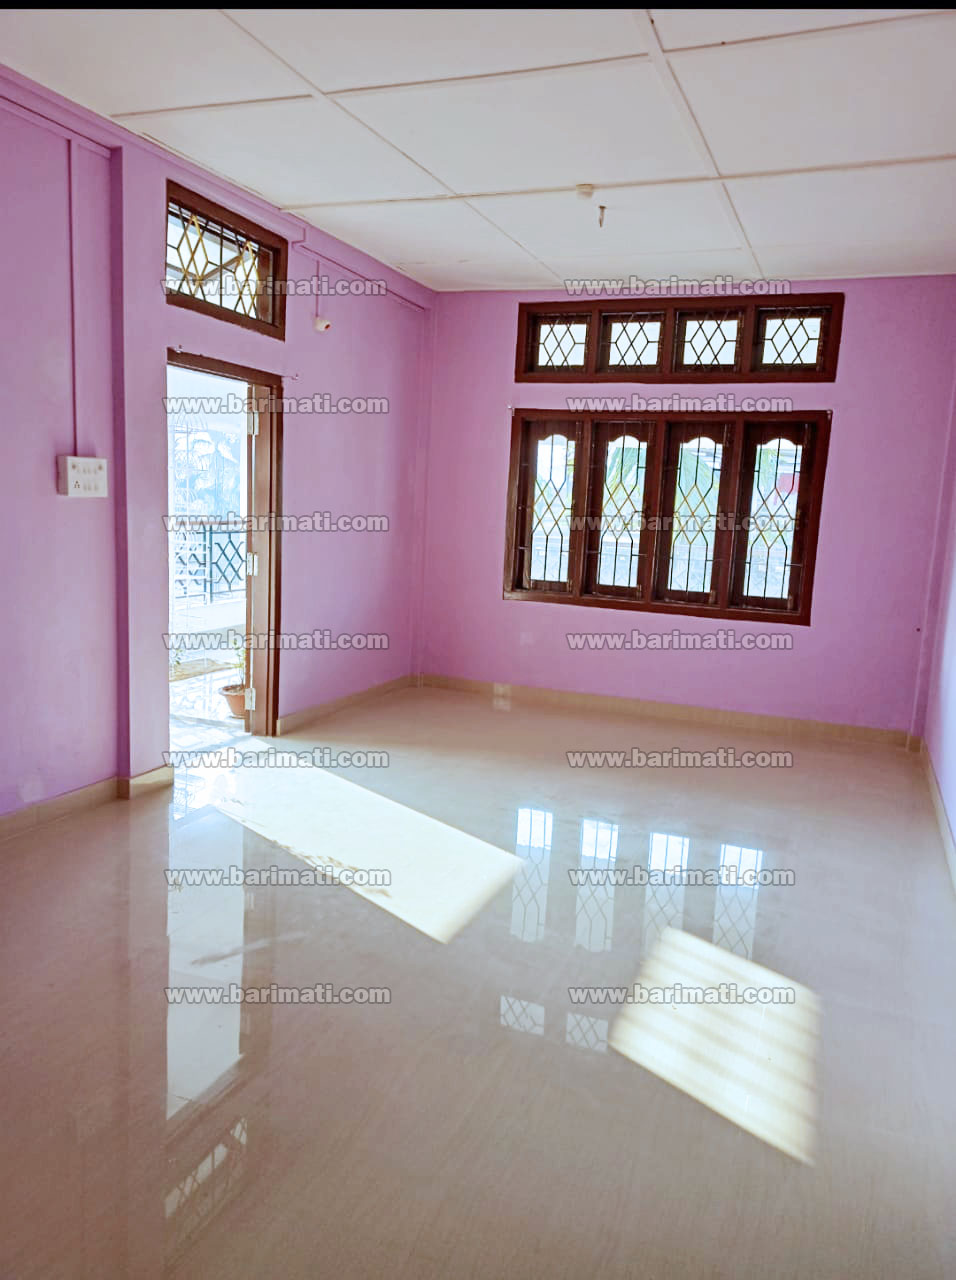 2 BHK rental home in the serene locale of Chiring Chapori, Dibrugarh, with affordable monthly rent under 12000